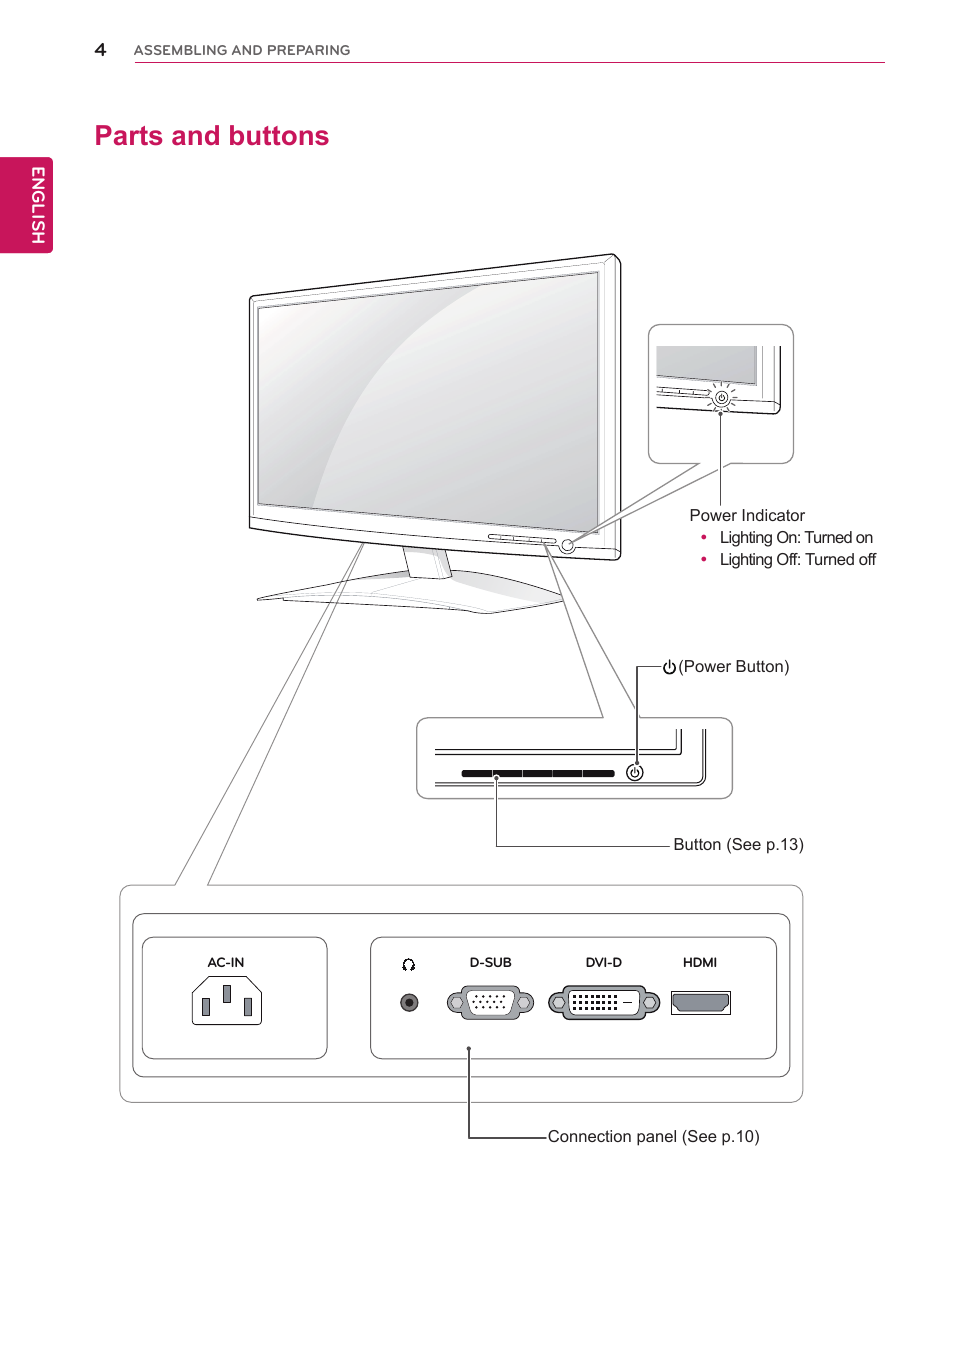 Parts and buttons | LG D2342P User Manual | Page 4 / 22